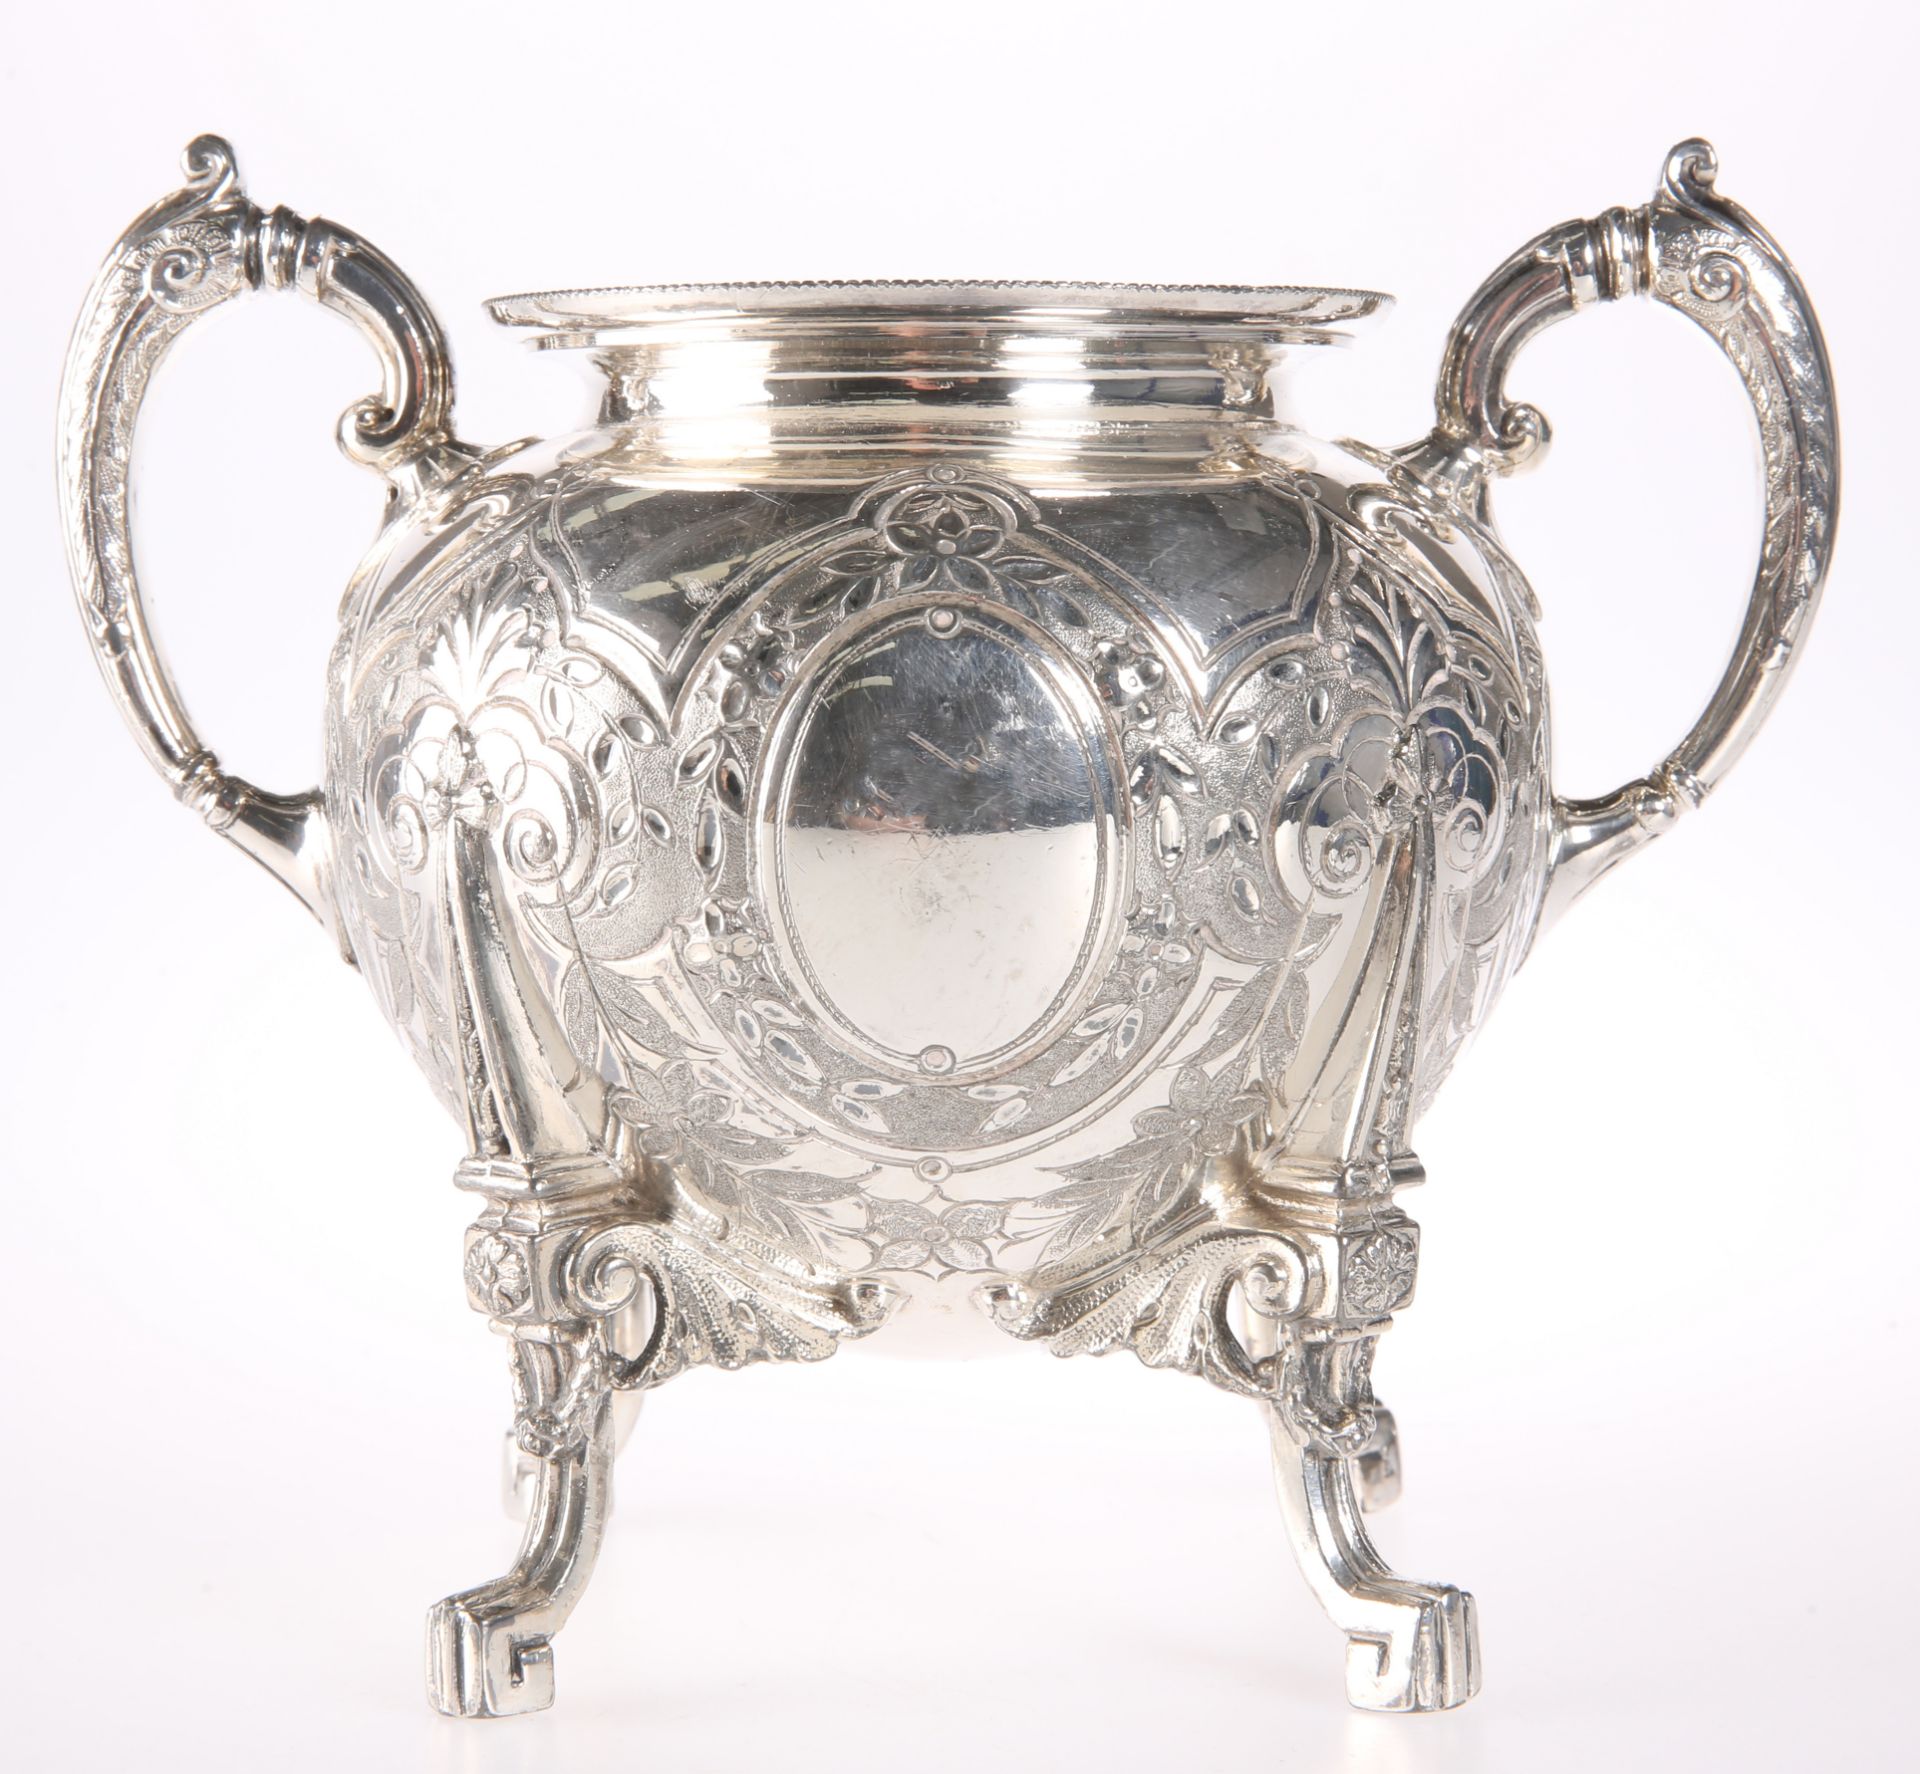 A LARGE SILVER PLATED TWO HANDLED SUGAR BOWL